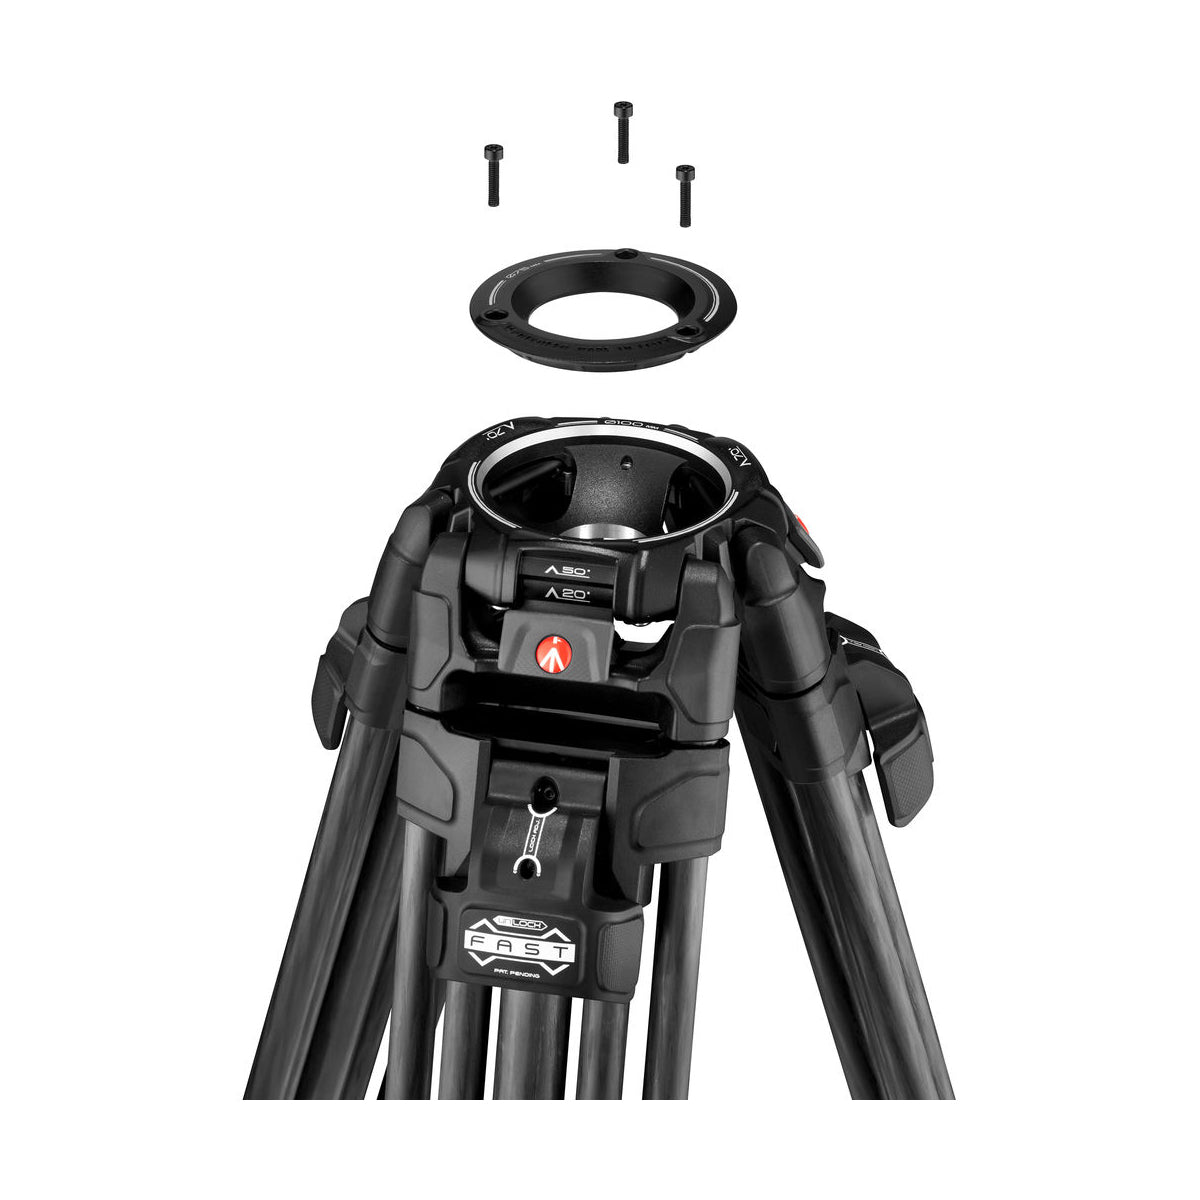 Manfrotto MVK612TWINFCUS Kit with Nitrotech 612 Fluid Head and 645 Fast Twin Leg Carbon Fiber Tripod & Bag